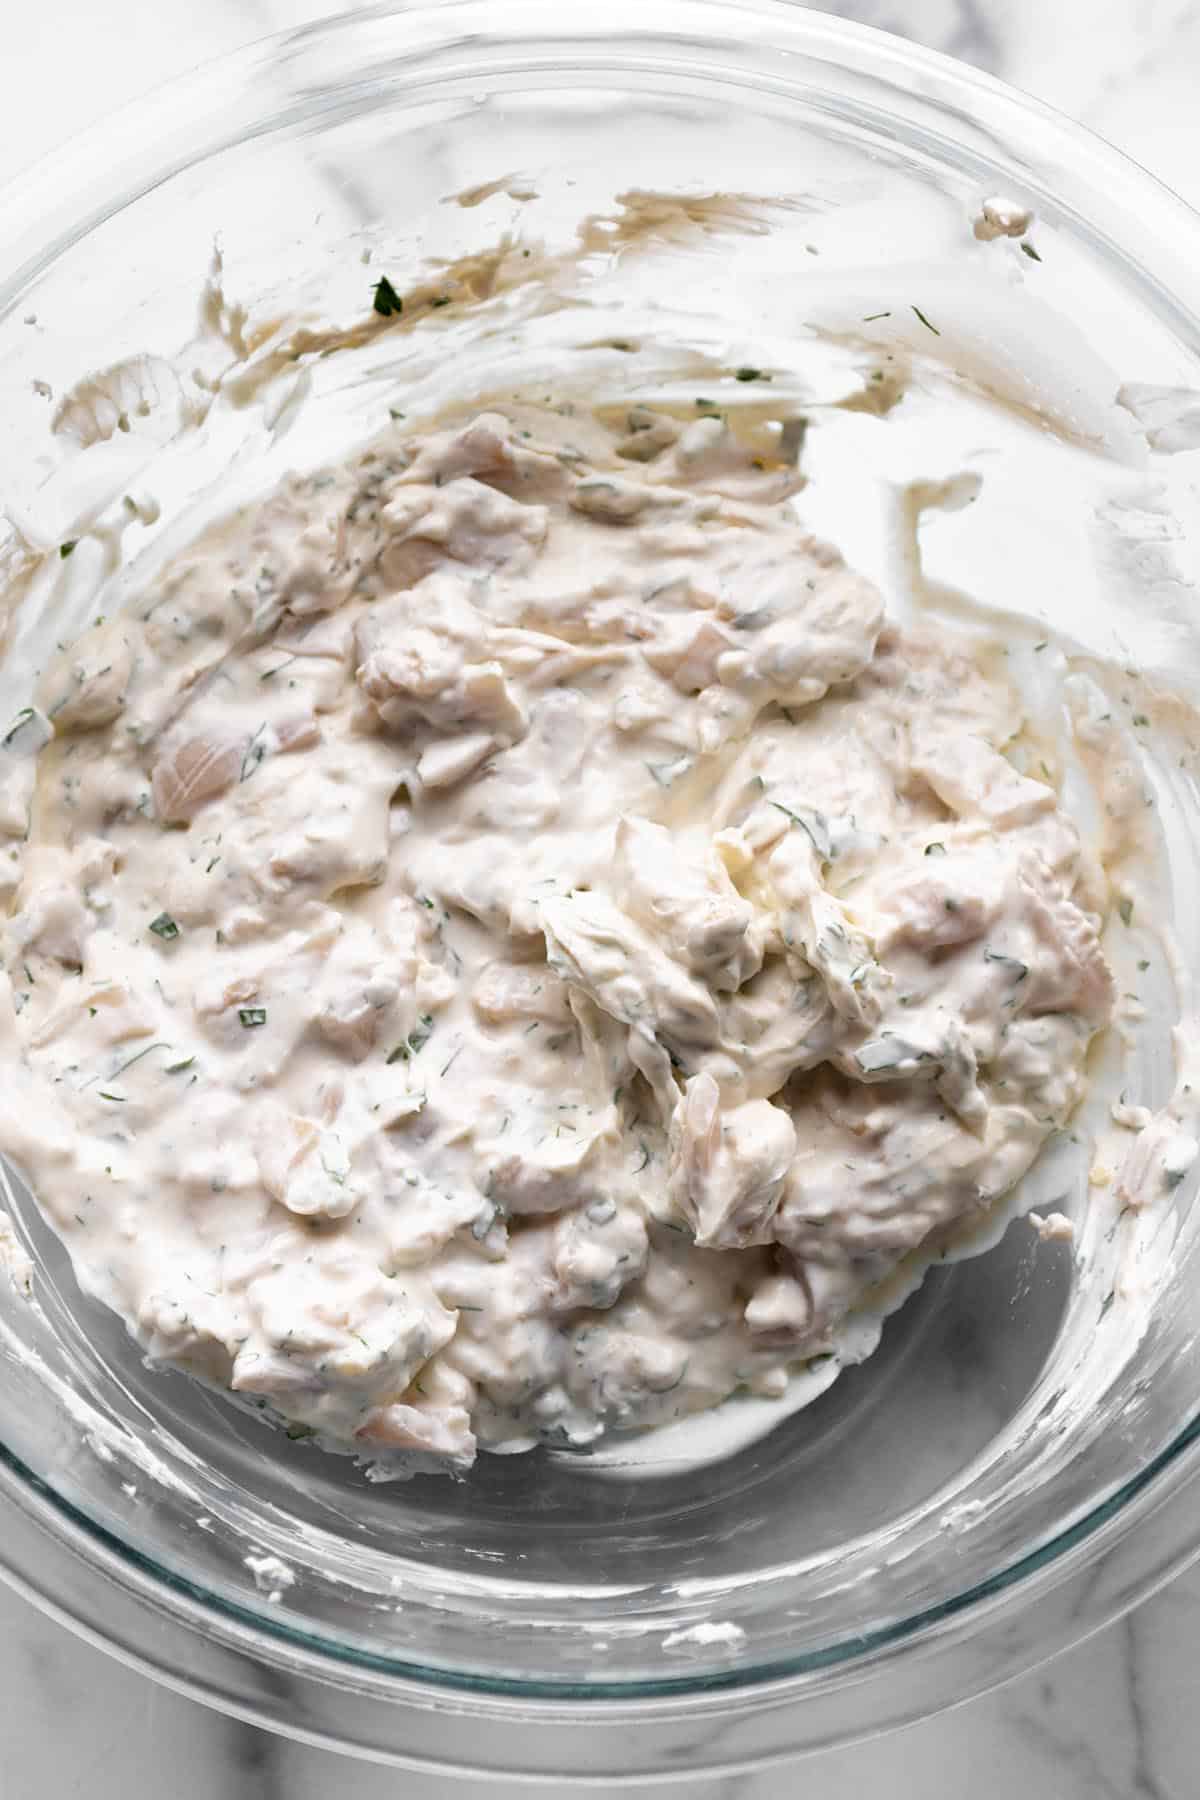 A bowl of cream cheese with herbs and fresh clams.